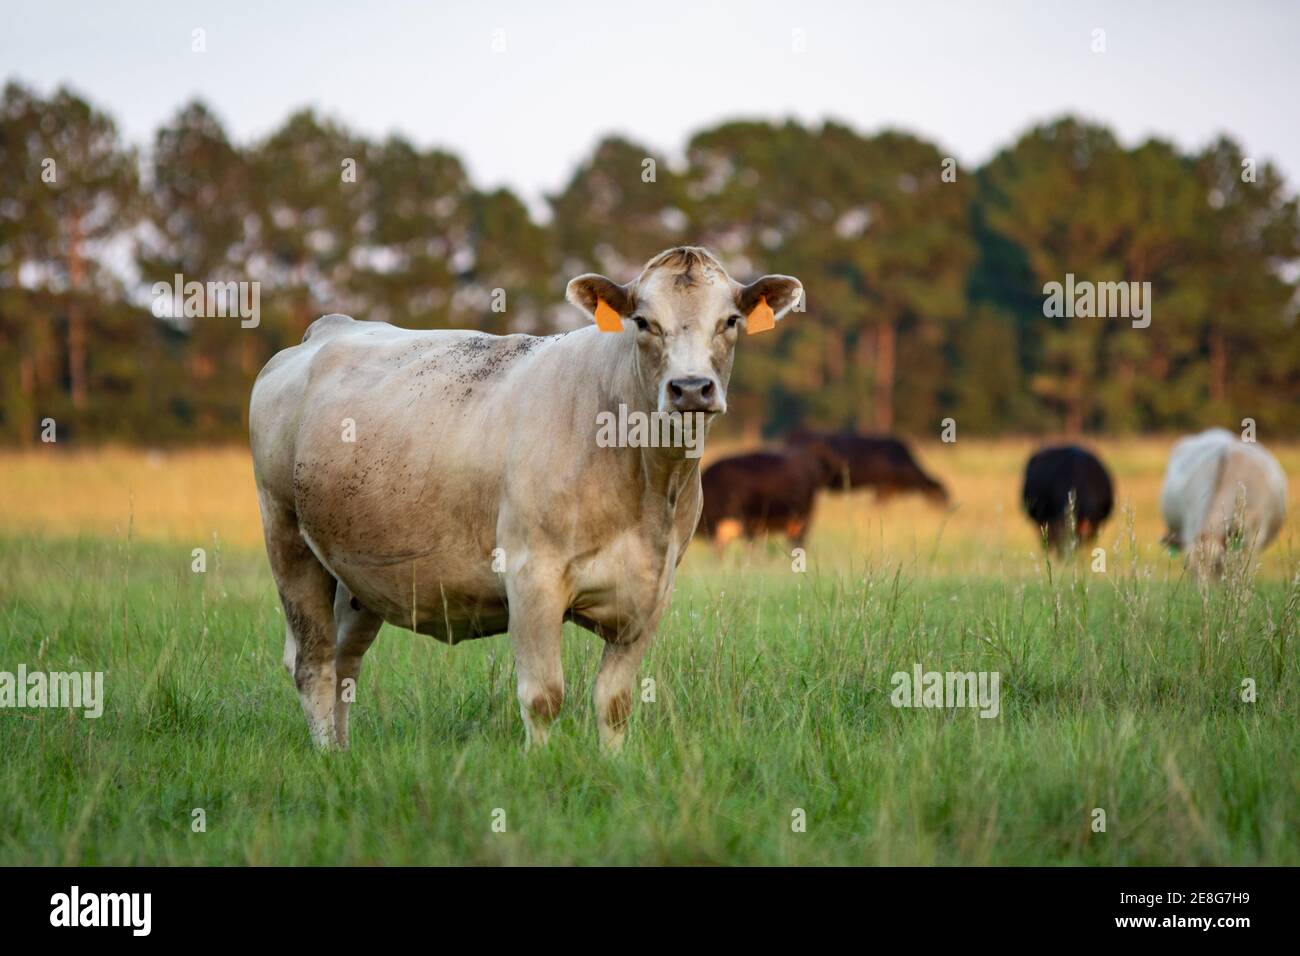 White Charolais crossbred beef cow looking at the camera with other cows grazing in the background out of focus. Stock Photo